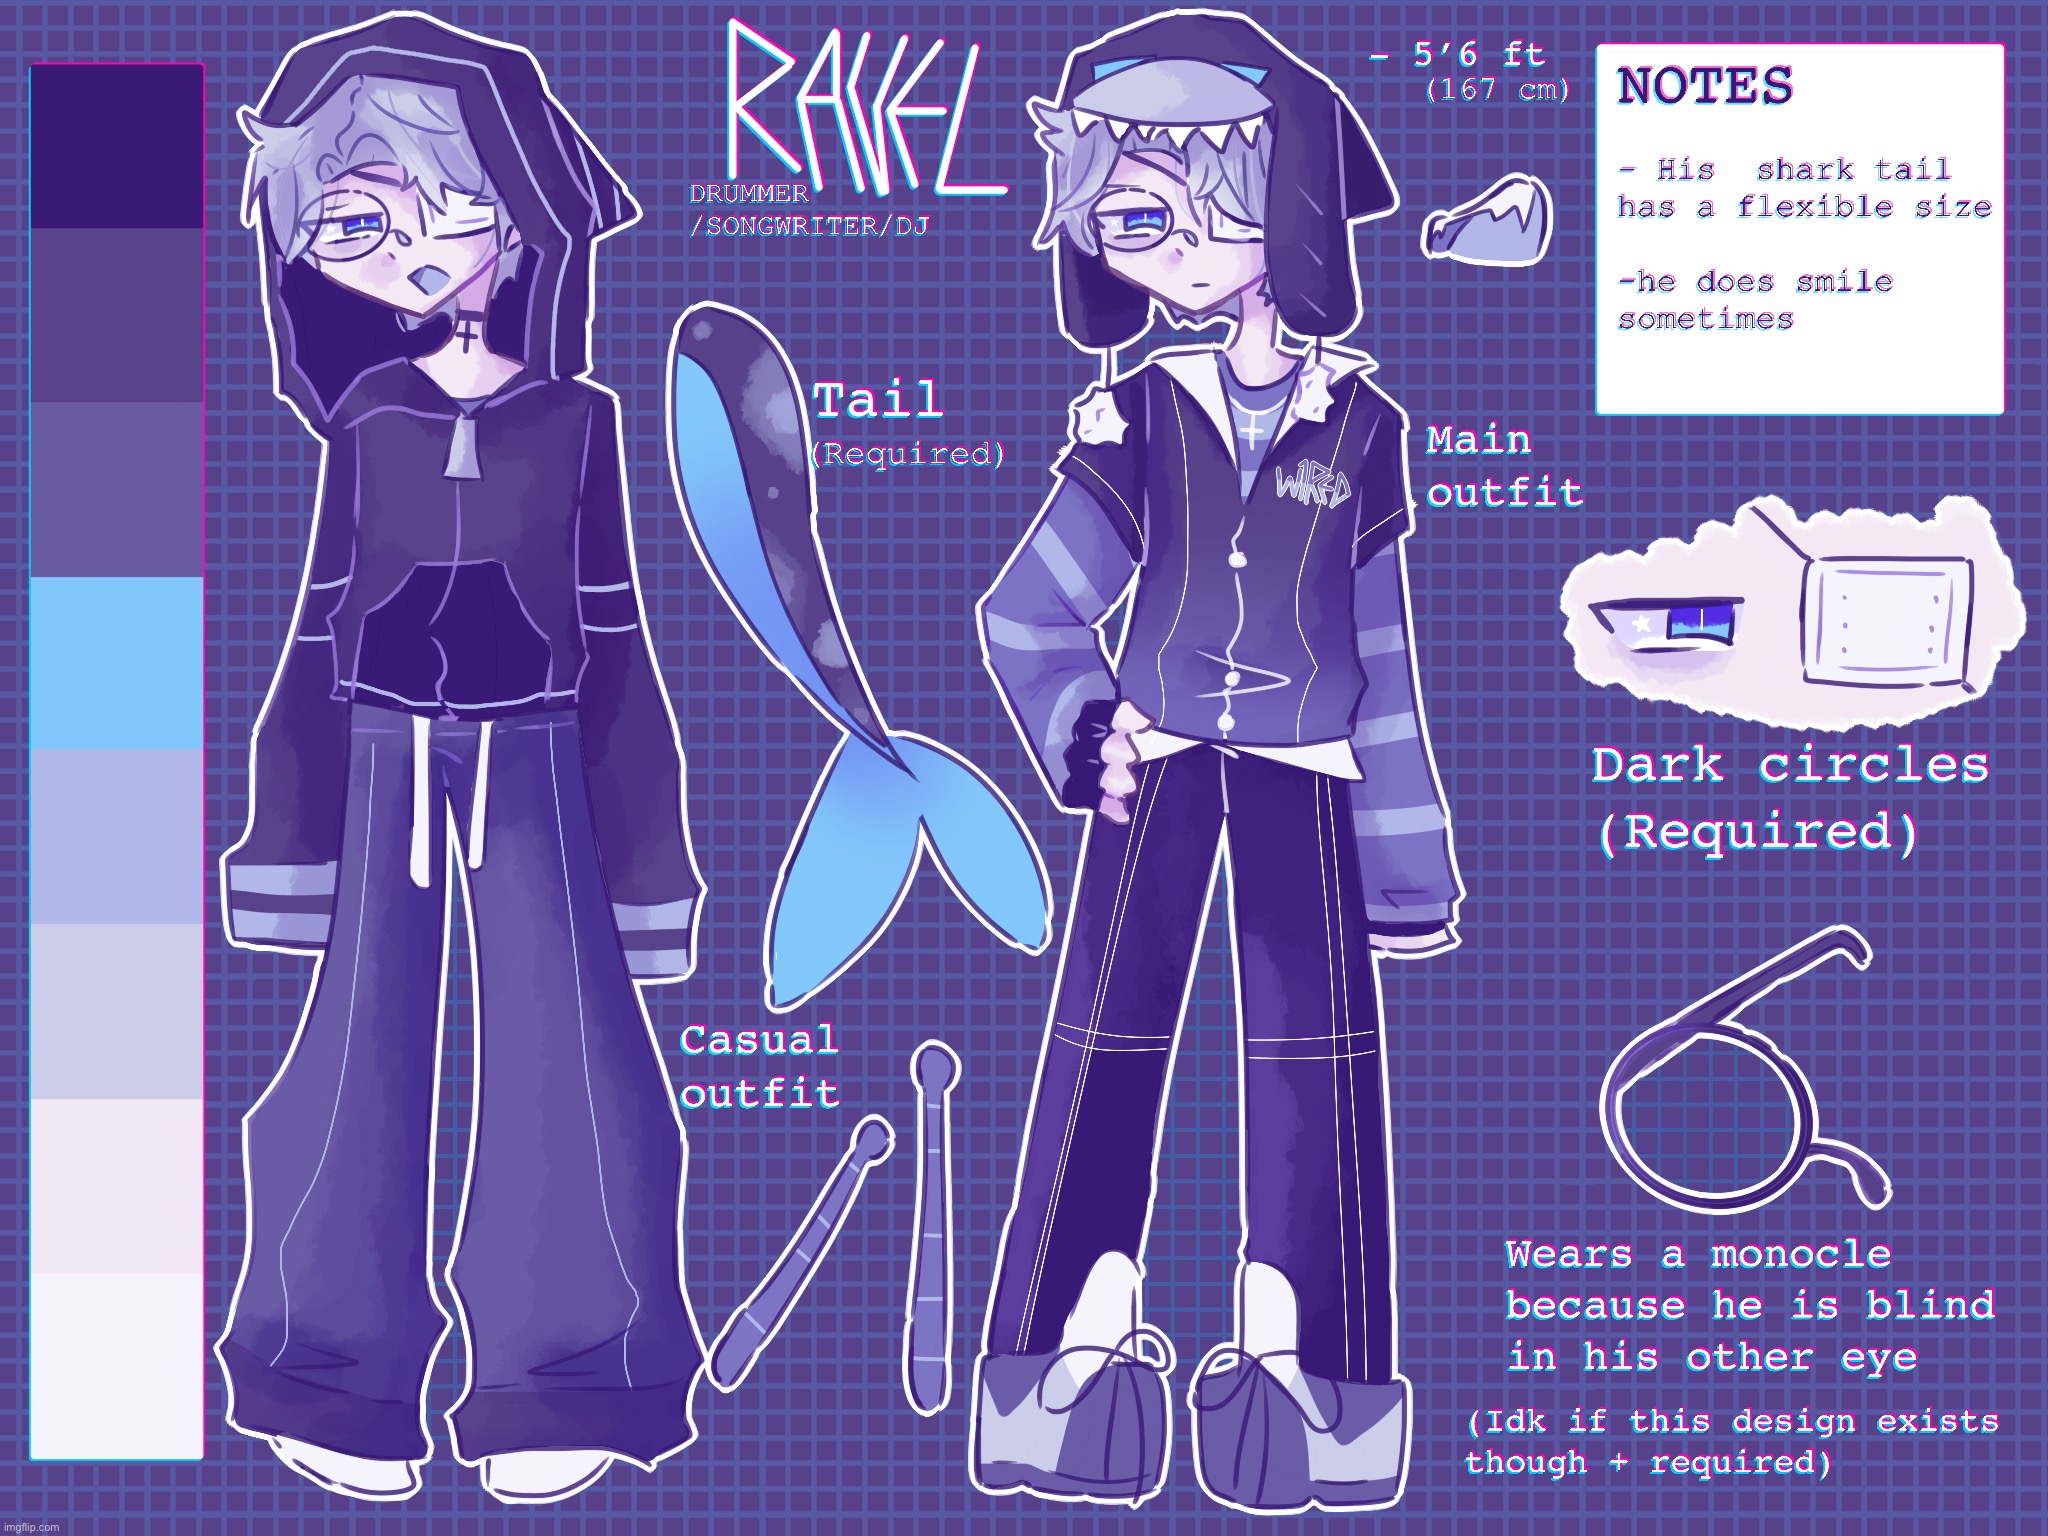 Ok 1 more proper ref for the oc until the band is completed (info in image desc) | [ABOUT] HE/HIM, 26, A VERSATILE SHARK DRUMMER, DJ AND SONGWRITER | HE IS MOSTLY KNOWN FOR HIS SHORT HEIGHT. ALMOST THE POLAR OPPOSITE OF ALT, HE IS ONLY A LITTLE UNDER 5’6 FT TALL (IS IT CONSIDERED SHORT? HE MAY BE TALL TO SOME IDK) AND IS PESSIMISTIC, QUIET, AND RARELY SMILES, BUT HE IS CONSIDERATE. HE IS EXTREMELY EMOTIONALLY SENSITIVE, AND BURSTS OUT CRYING AT TIMES LIKE A TEENAGER IN PUBERTY. HE IS SOMEWHAT CHILDISH AND IS STILL PICKY ABOUT HIS FOOD. HE IS EVEN SHYER AND SLIGHTLY HATES SOCIALIZATION. USUALLY SPENDS MOST THE TIME IN THE STUDIO AND PRETTY MUCH LIVES THERE. DUE TO AN INCURABLE DISEASE THAT AFFECTED HIM WHEN HE WAS LITTLE HE IS BLIND IN ONE EYE. HE RECENTLY DEBUTED AS A RADIO DJ | made w/ Imgflip meme maker